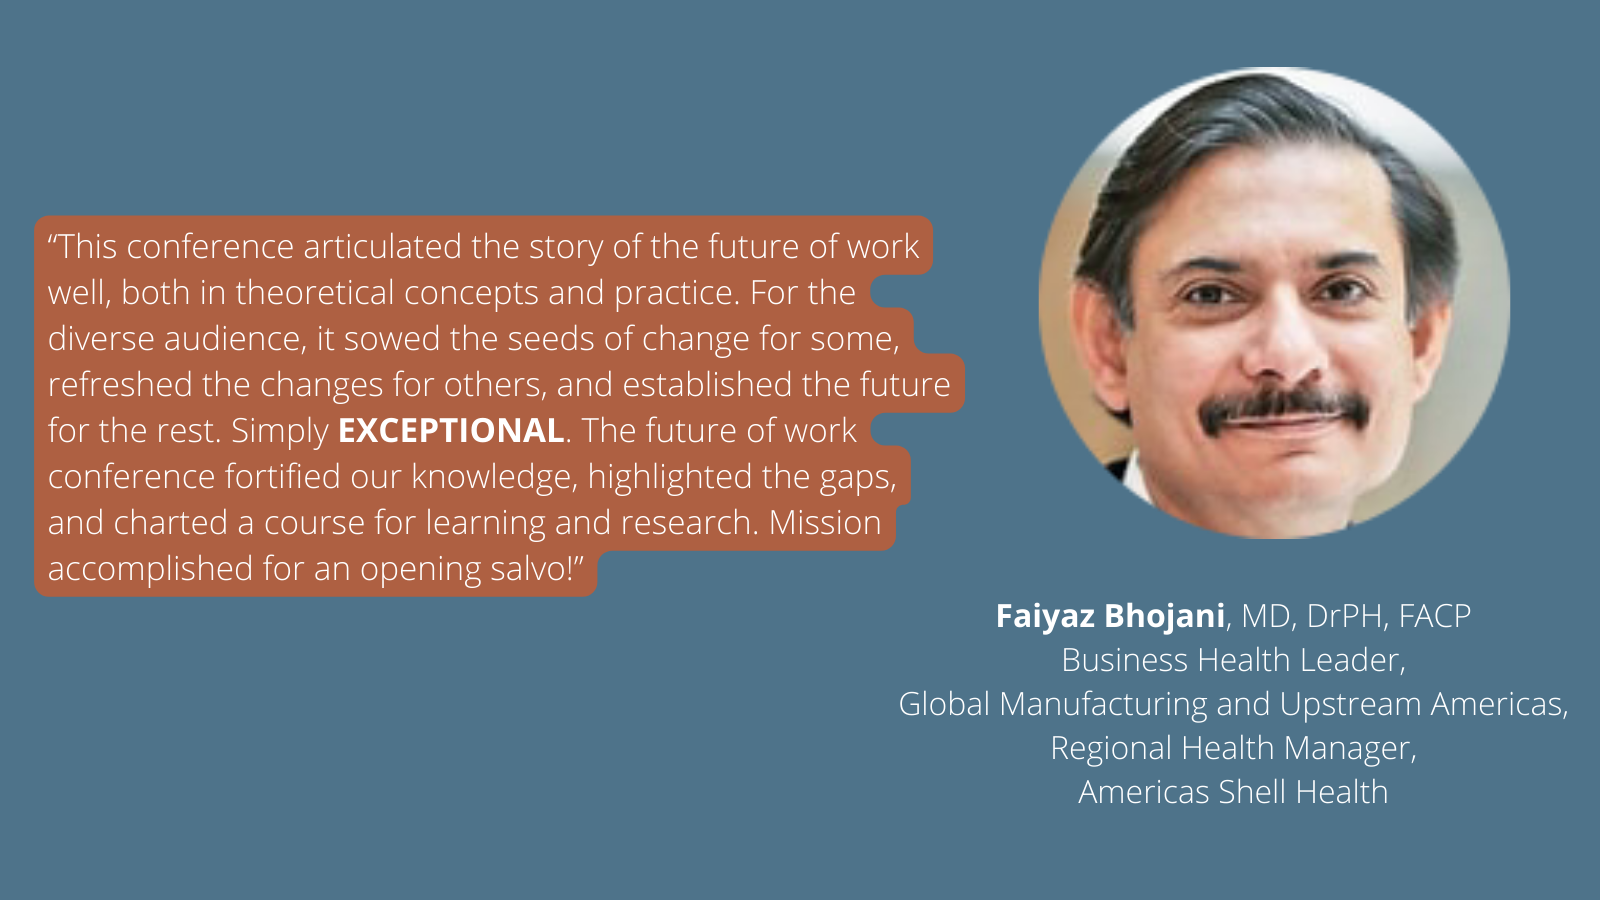 Faiyaz Bhojani, MD, DrPH, FACP Business Health Leader, Global Manufacturing and Upstream Americas, Regional Health Manager, Americas Shell Health-3